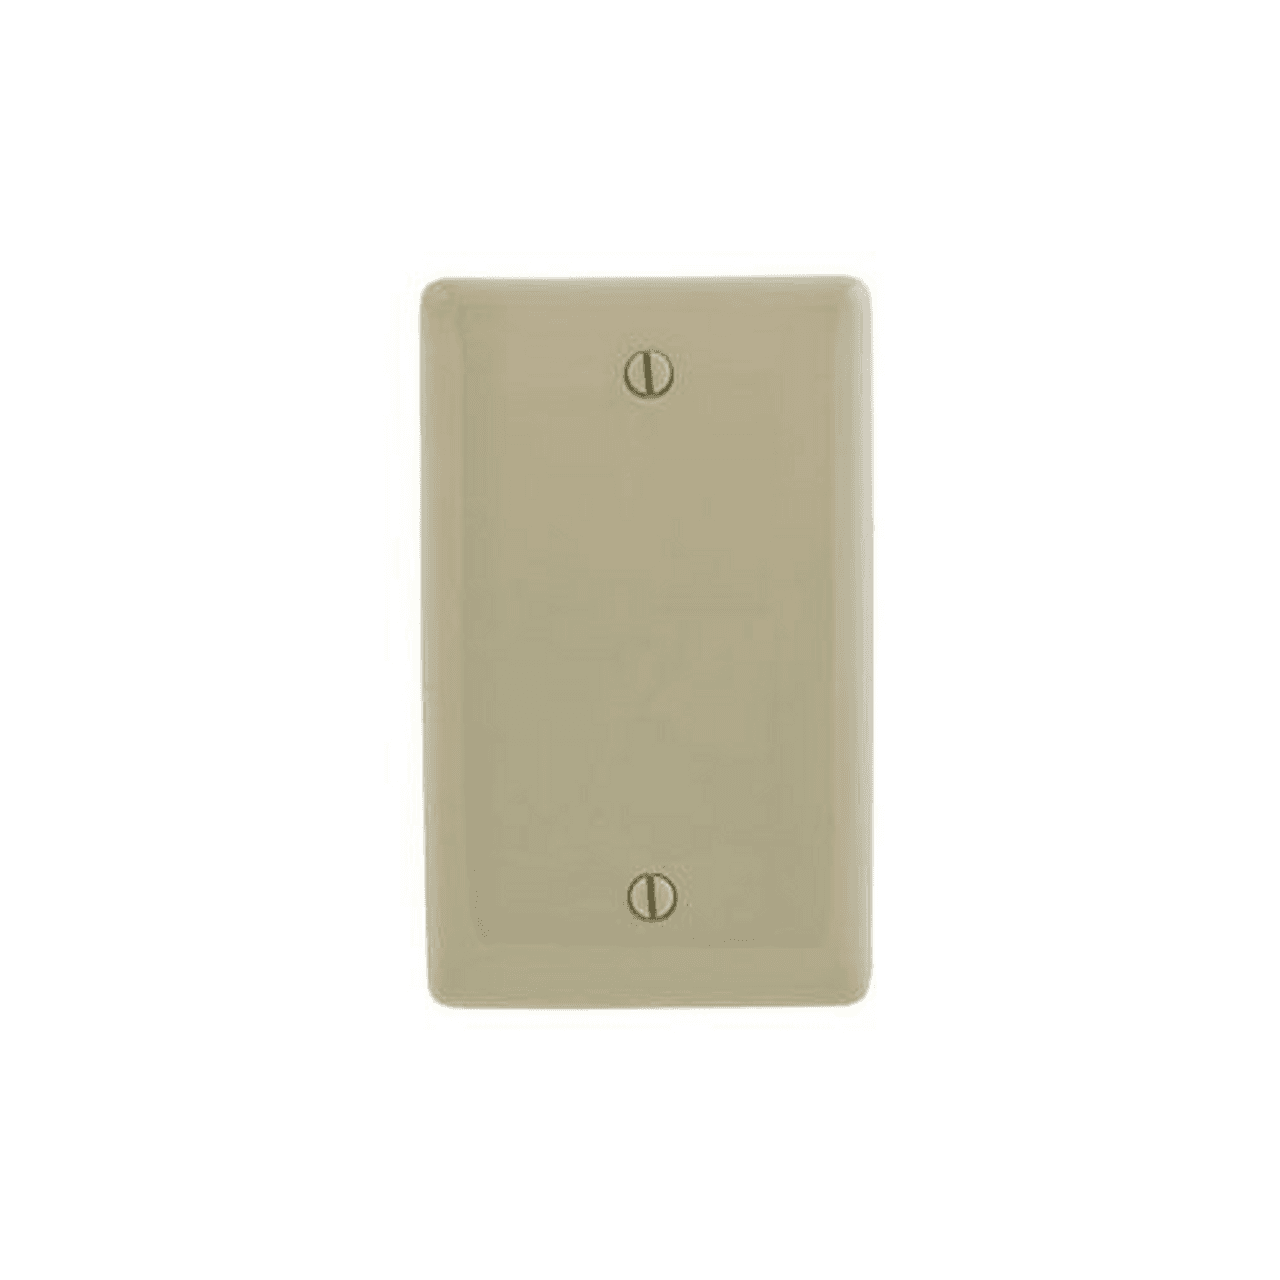 Hubbell NP13I Wallplates and Box Covers, Wallplate, Nylon, 1-Gang, Blank, Box Mount, Ivory  ; Reinforcement ribs for extra strength ; High-impact, self-extinguishing nylon material ; Captive screw feature holds mounting screw in place ; Standard Size is 1/8" larger to 